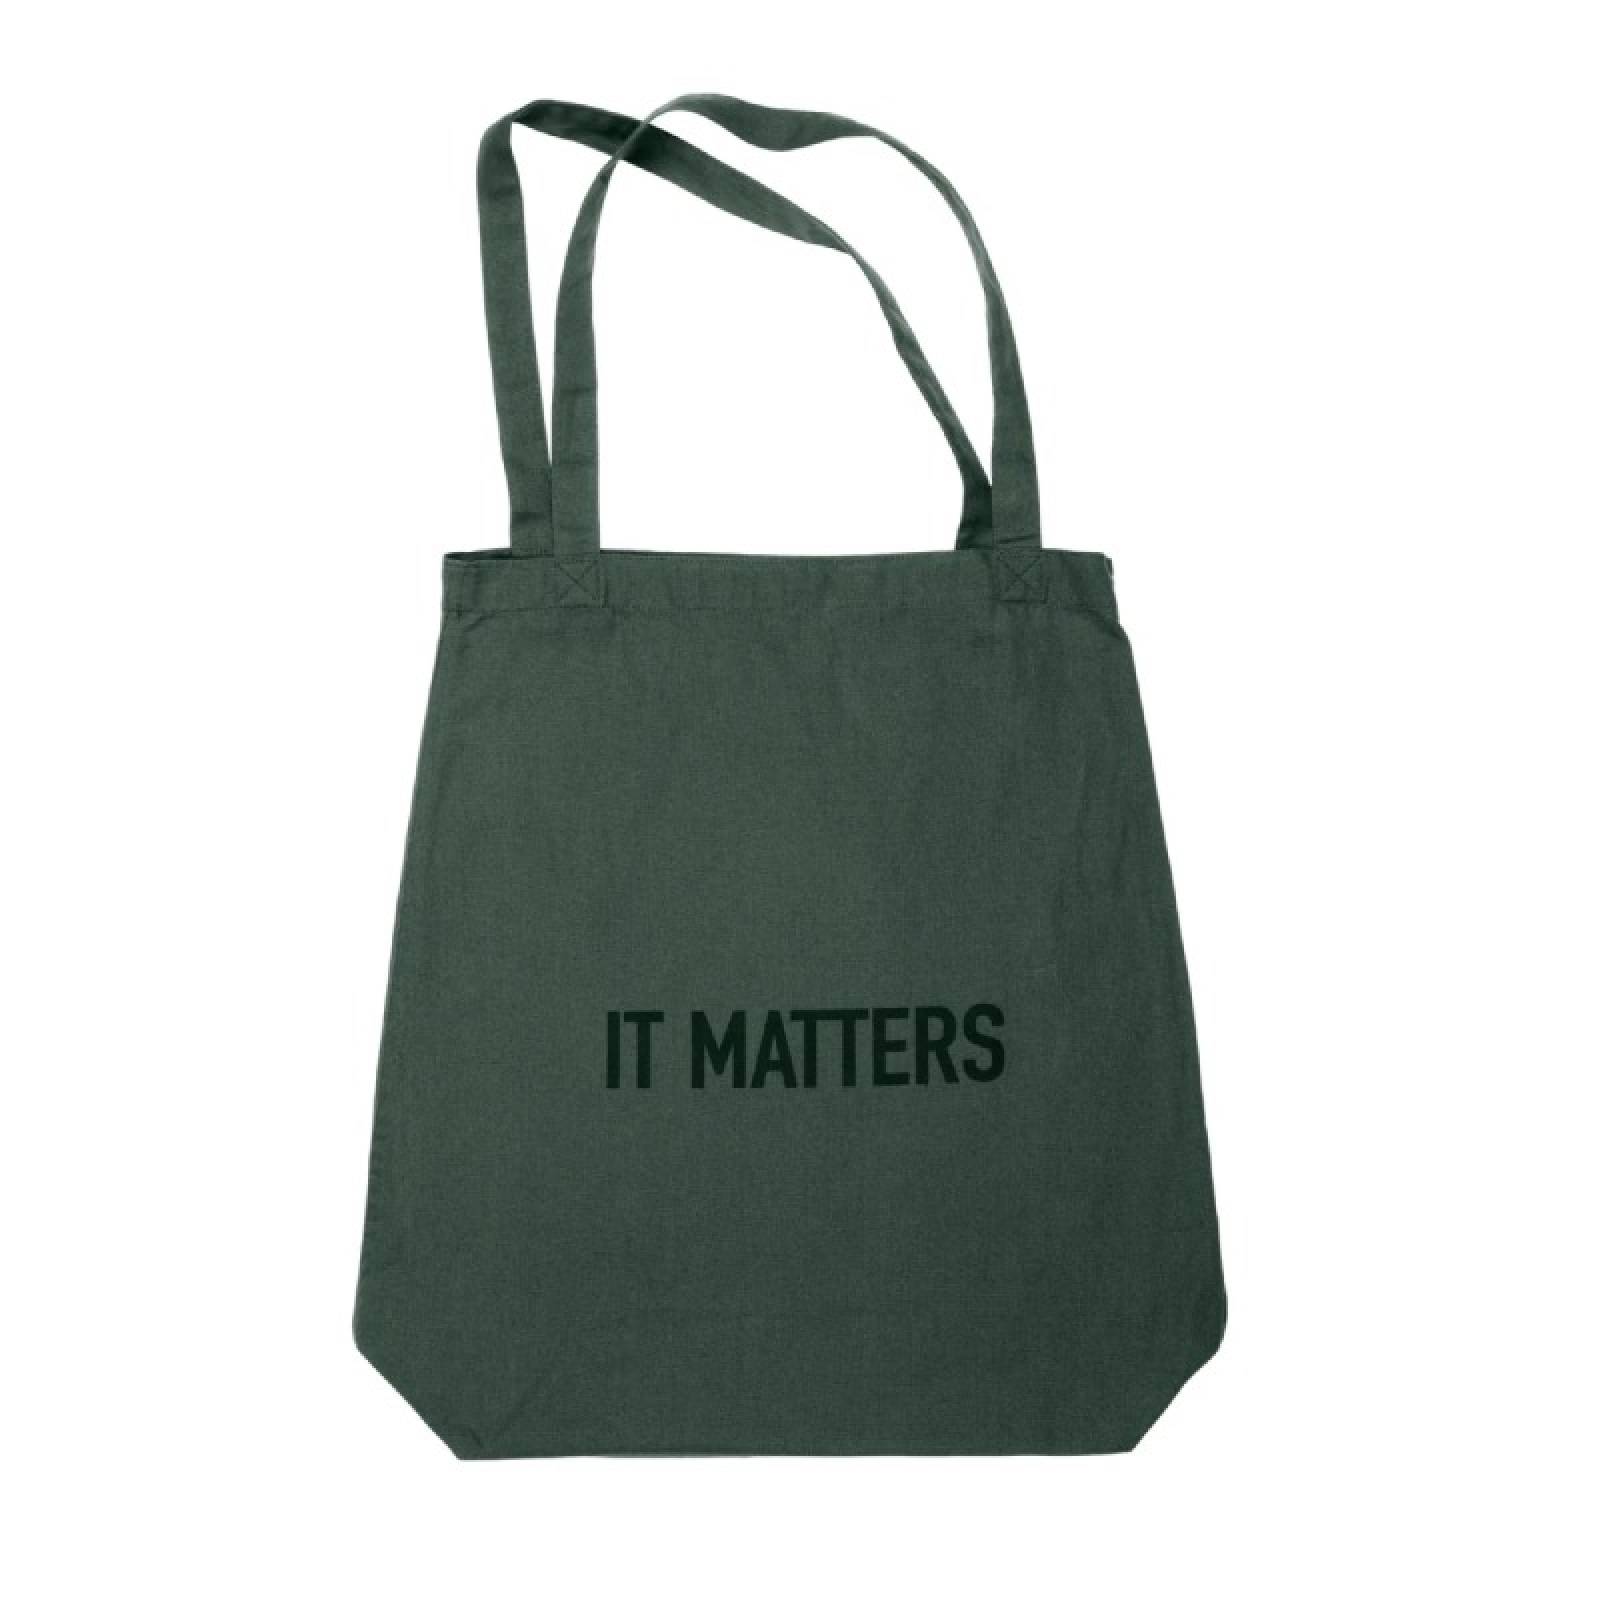 It Matters - Large Cotton Tote Bag In Dark Green